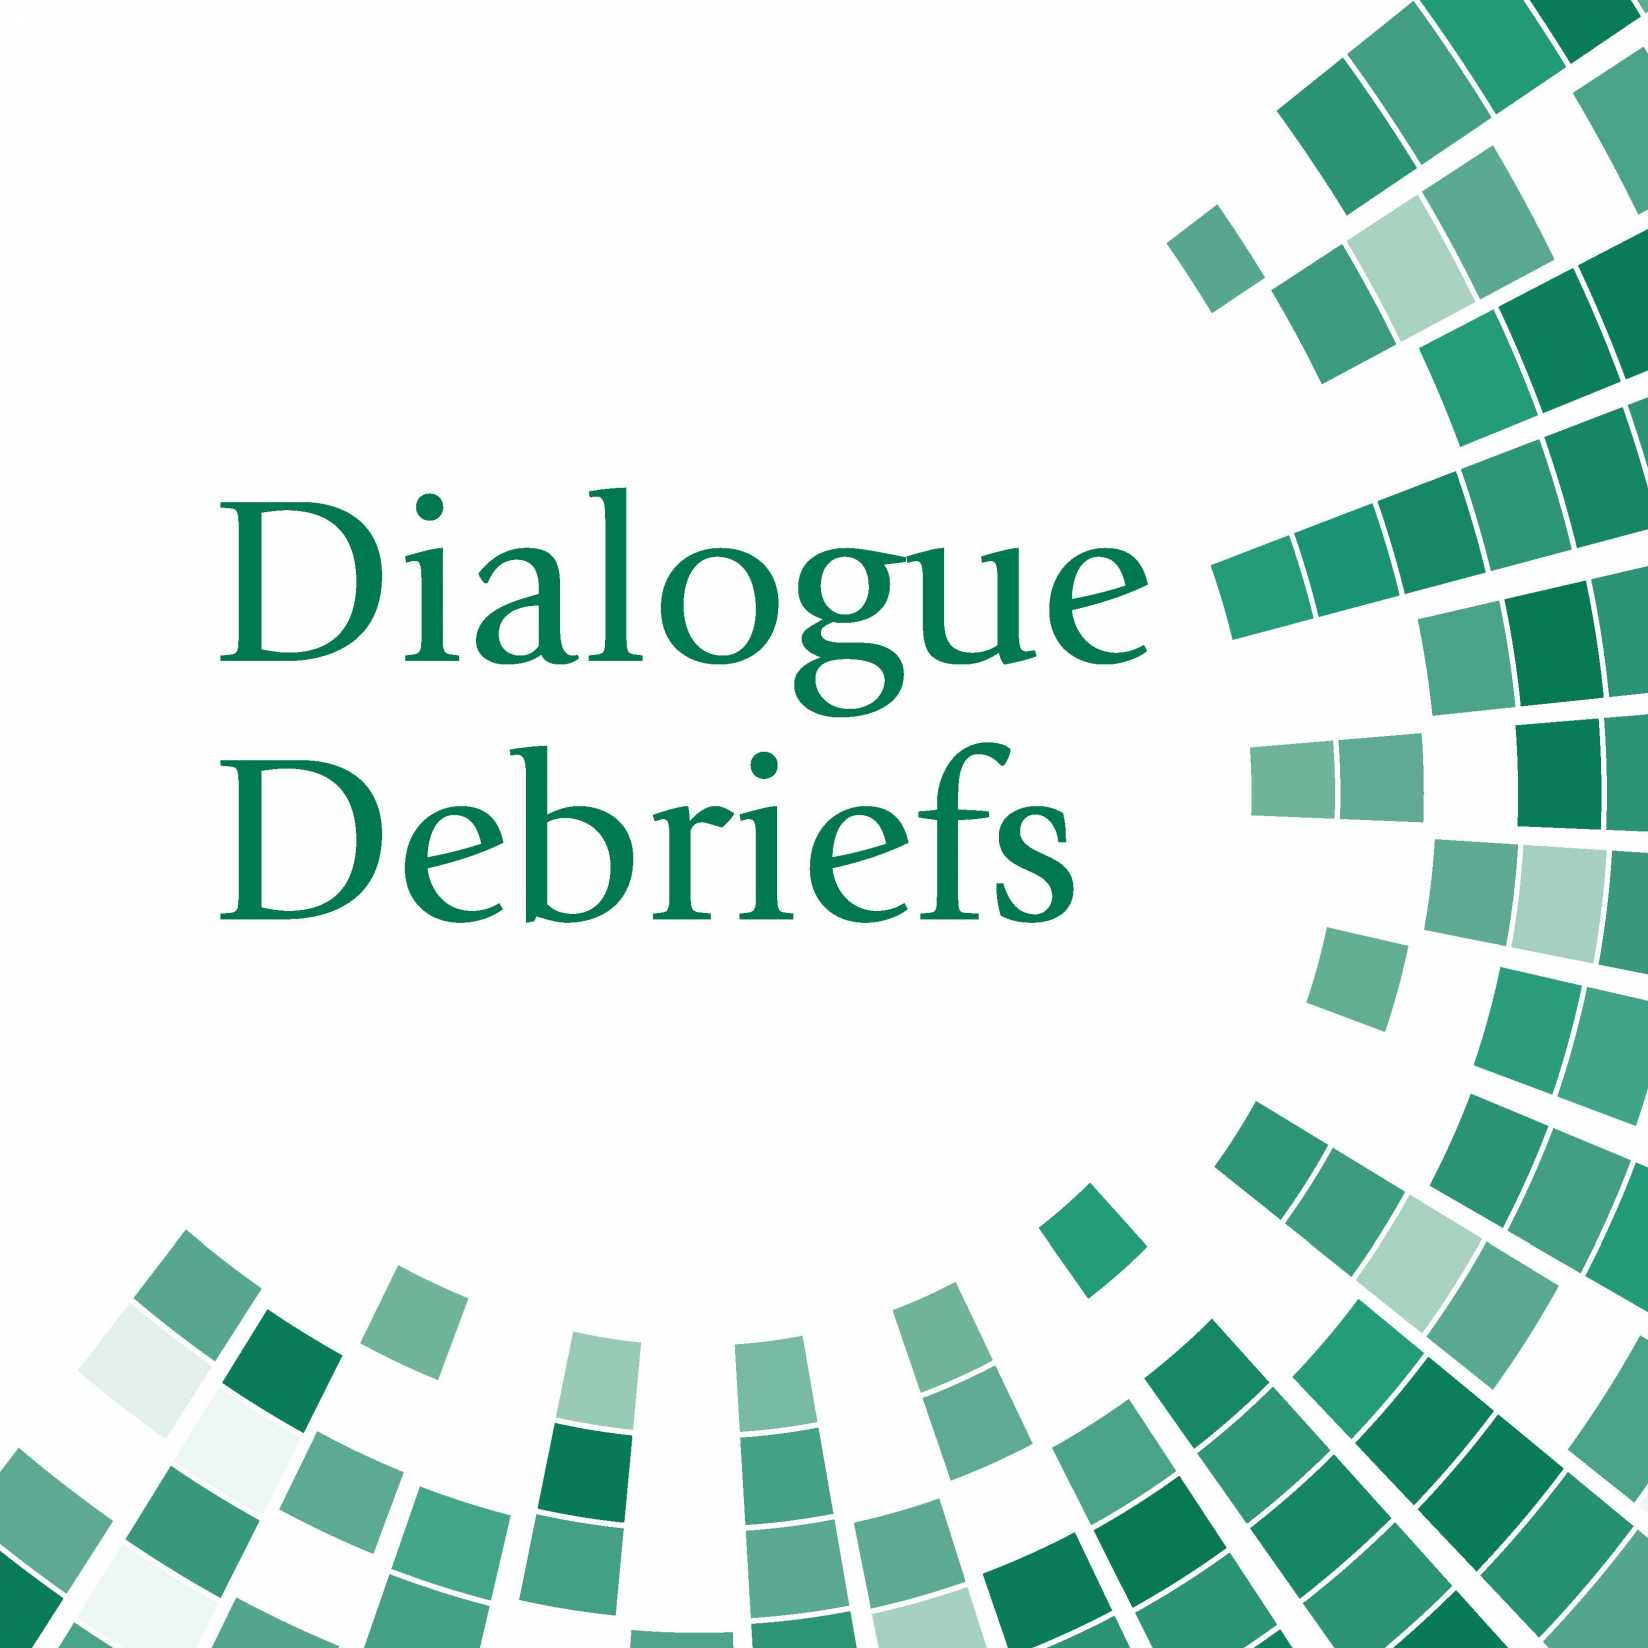 Annual Meeting of the National Catholic-Muslim Dialogue